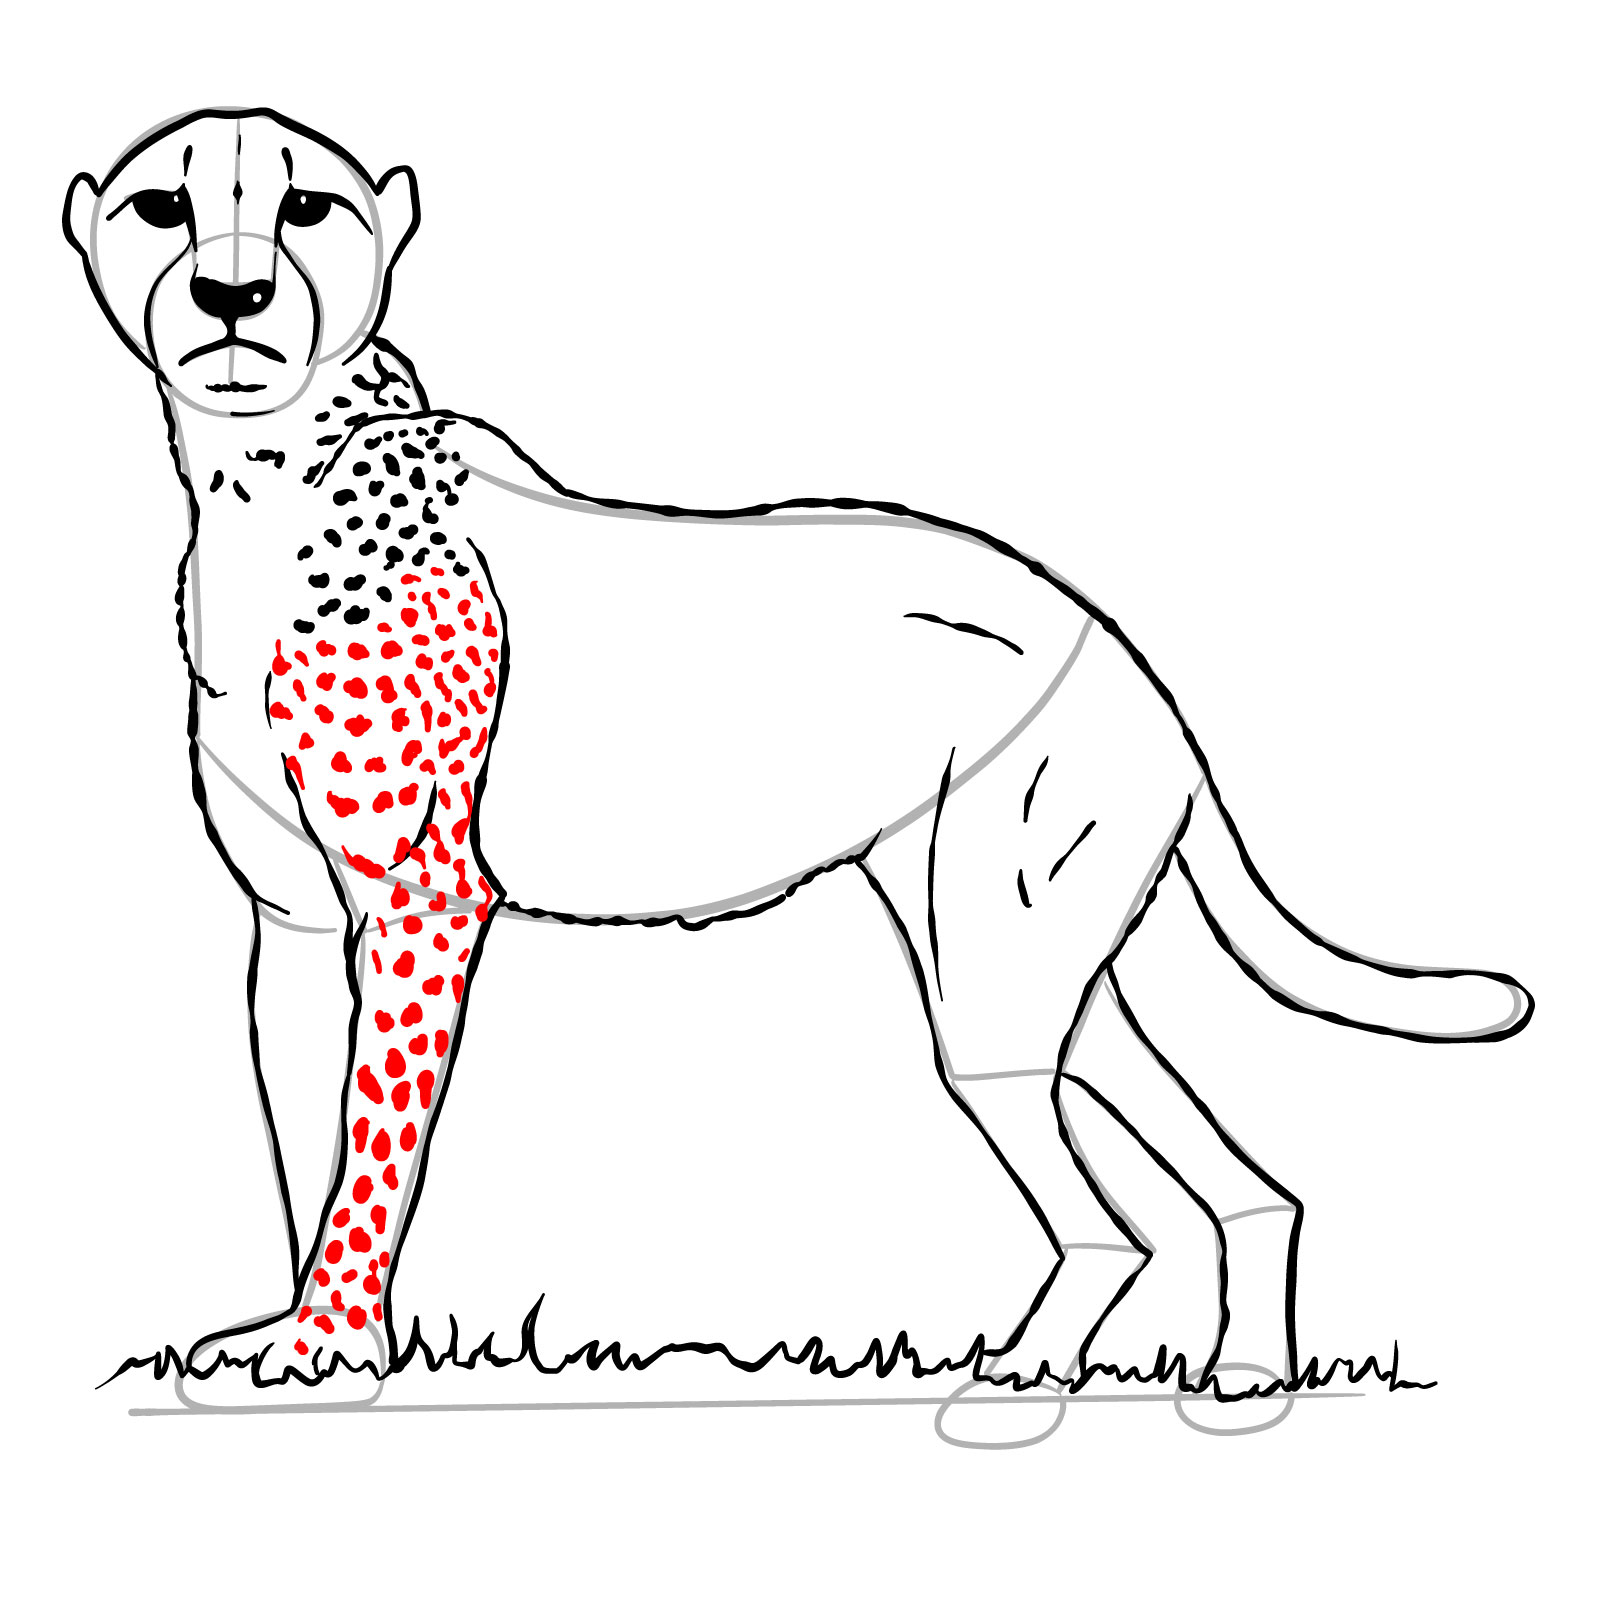 How to draw a Cheetah - step 25